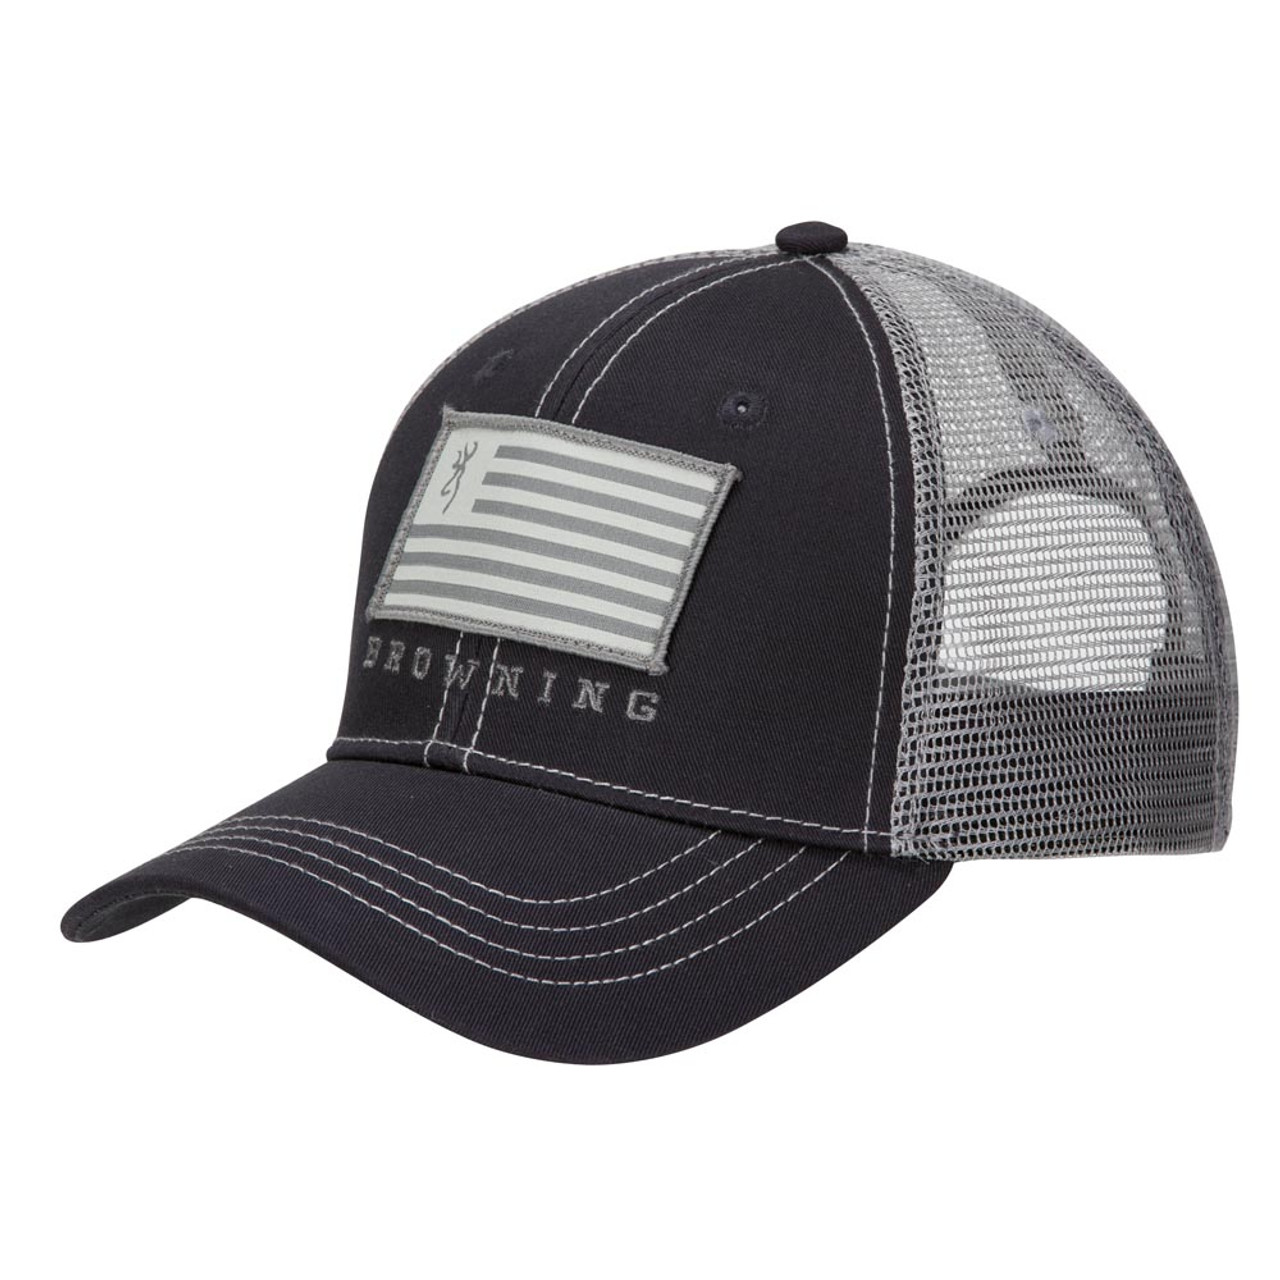 Browning Patriot Cap- Slate- Front